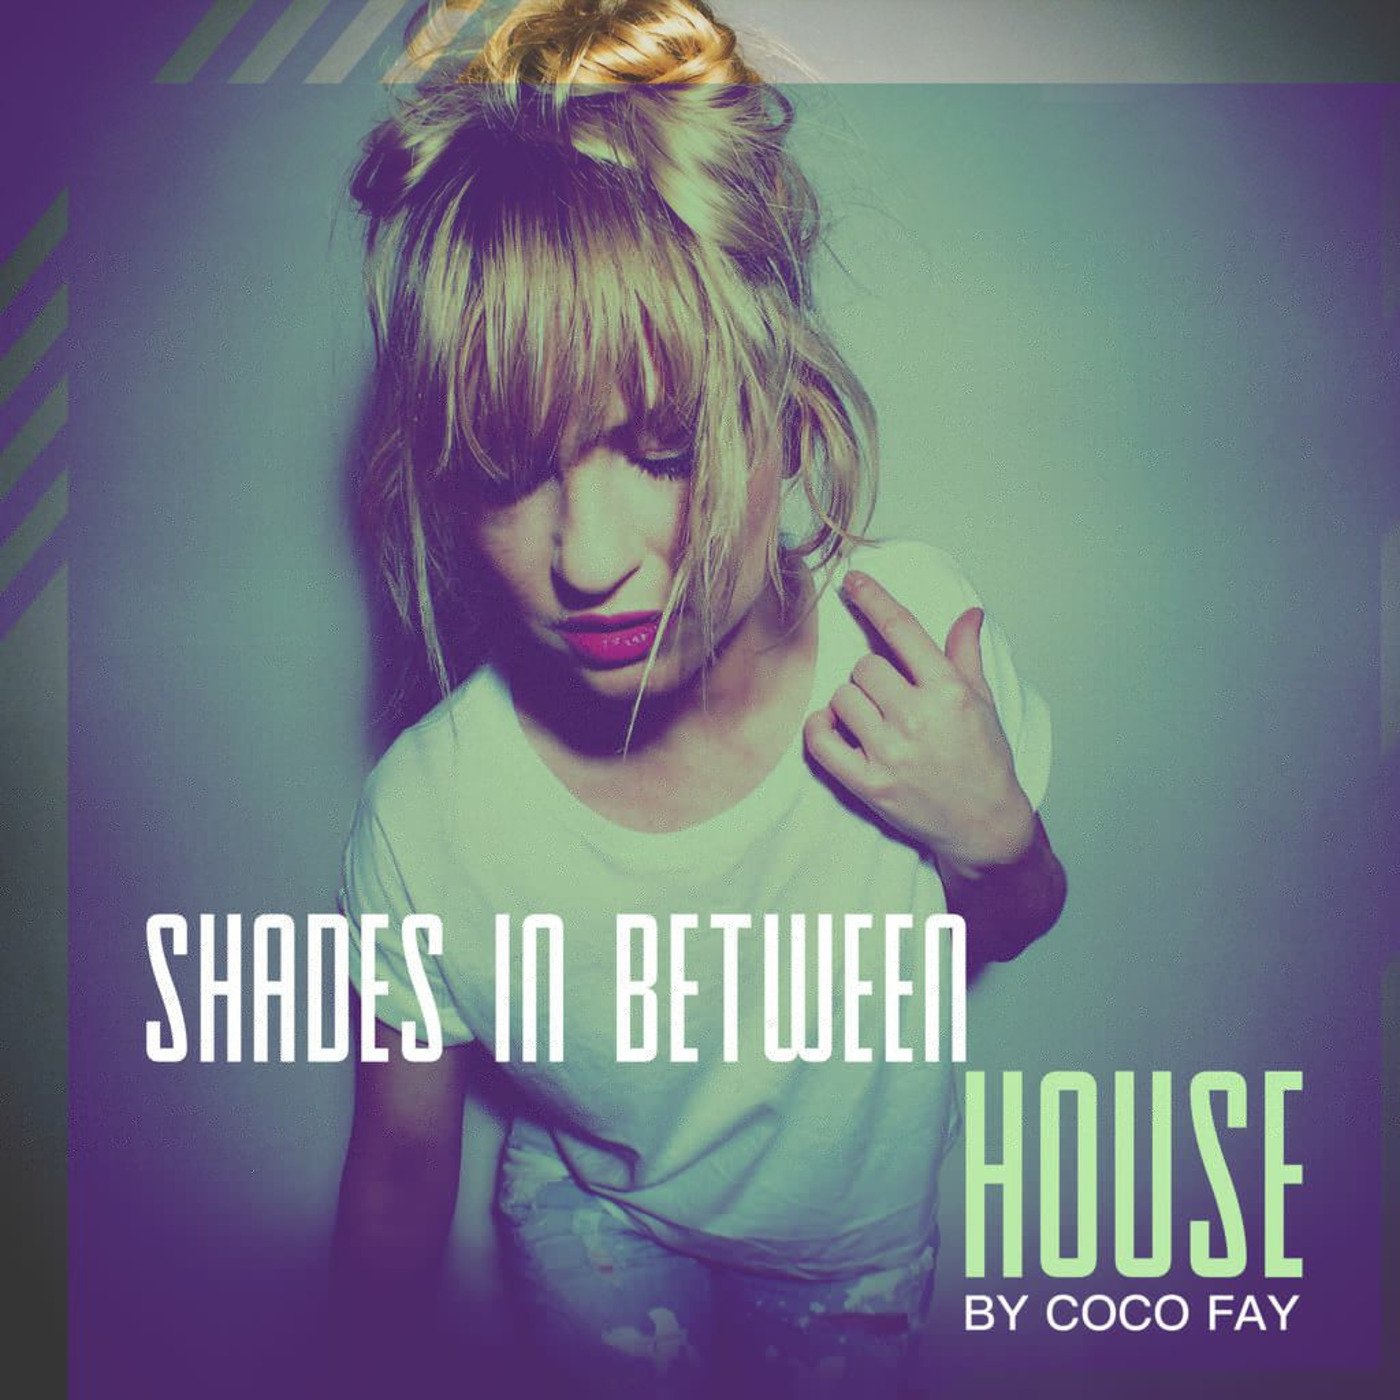 Shades of House #009 by Coco Fay